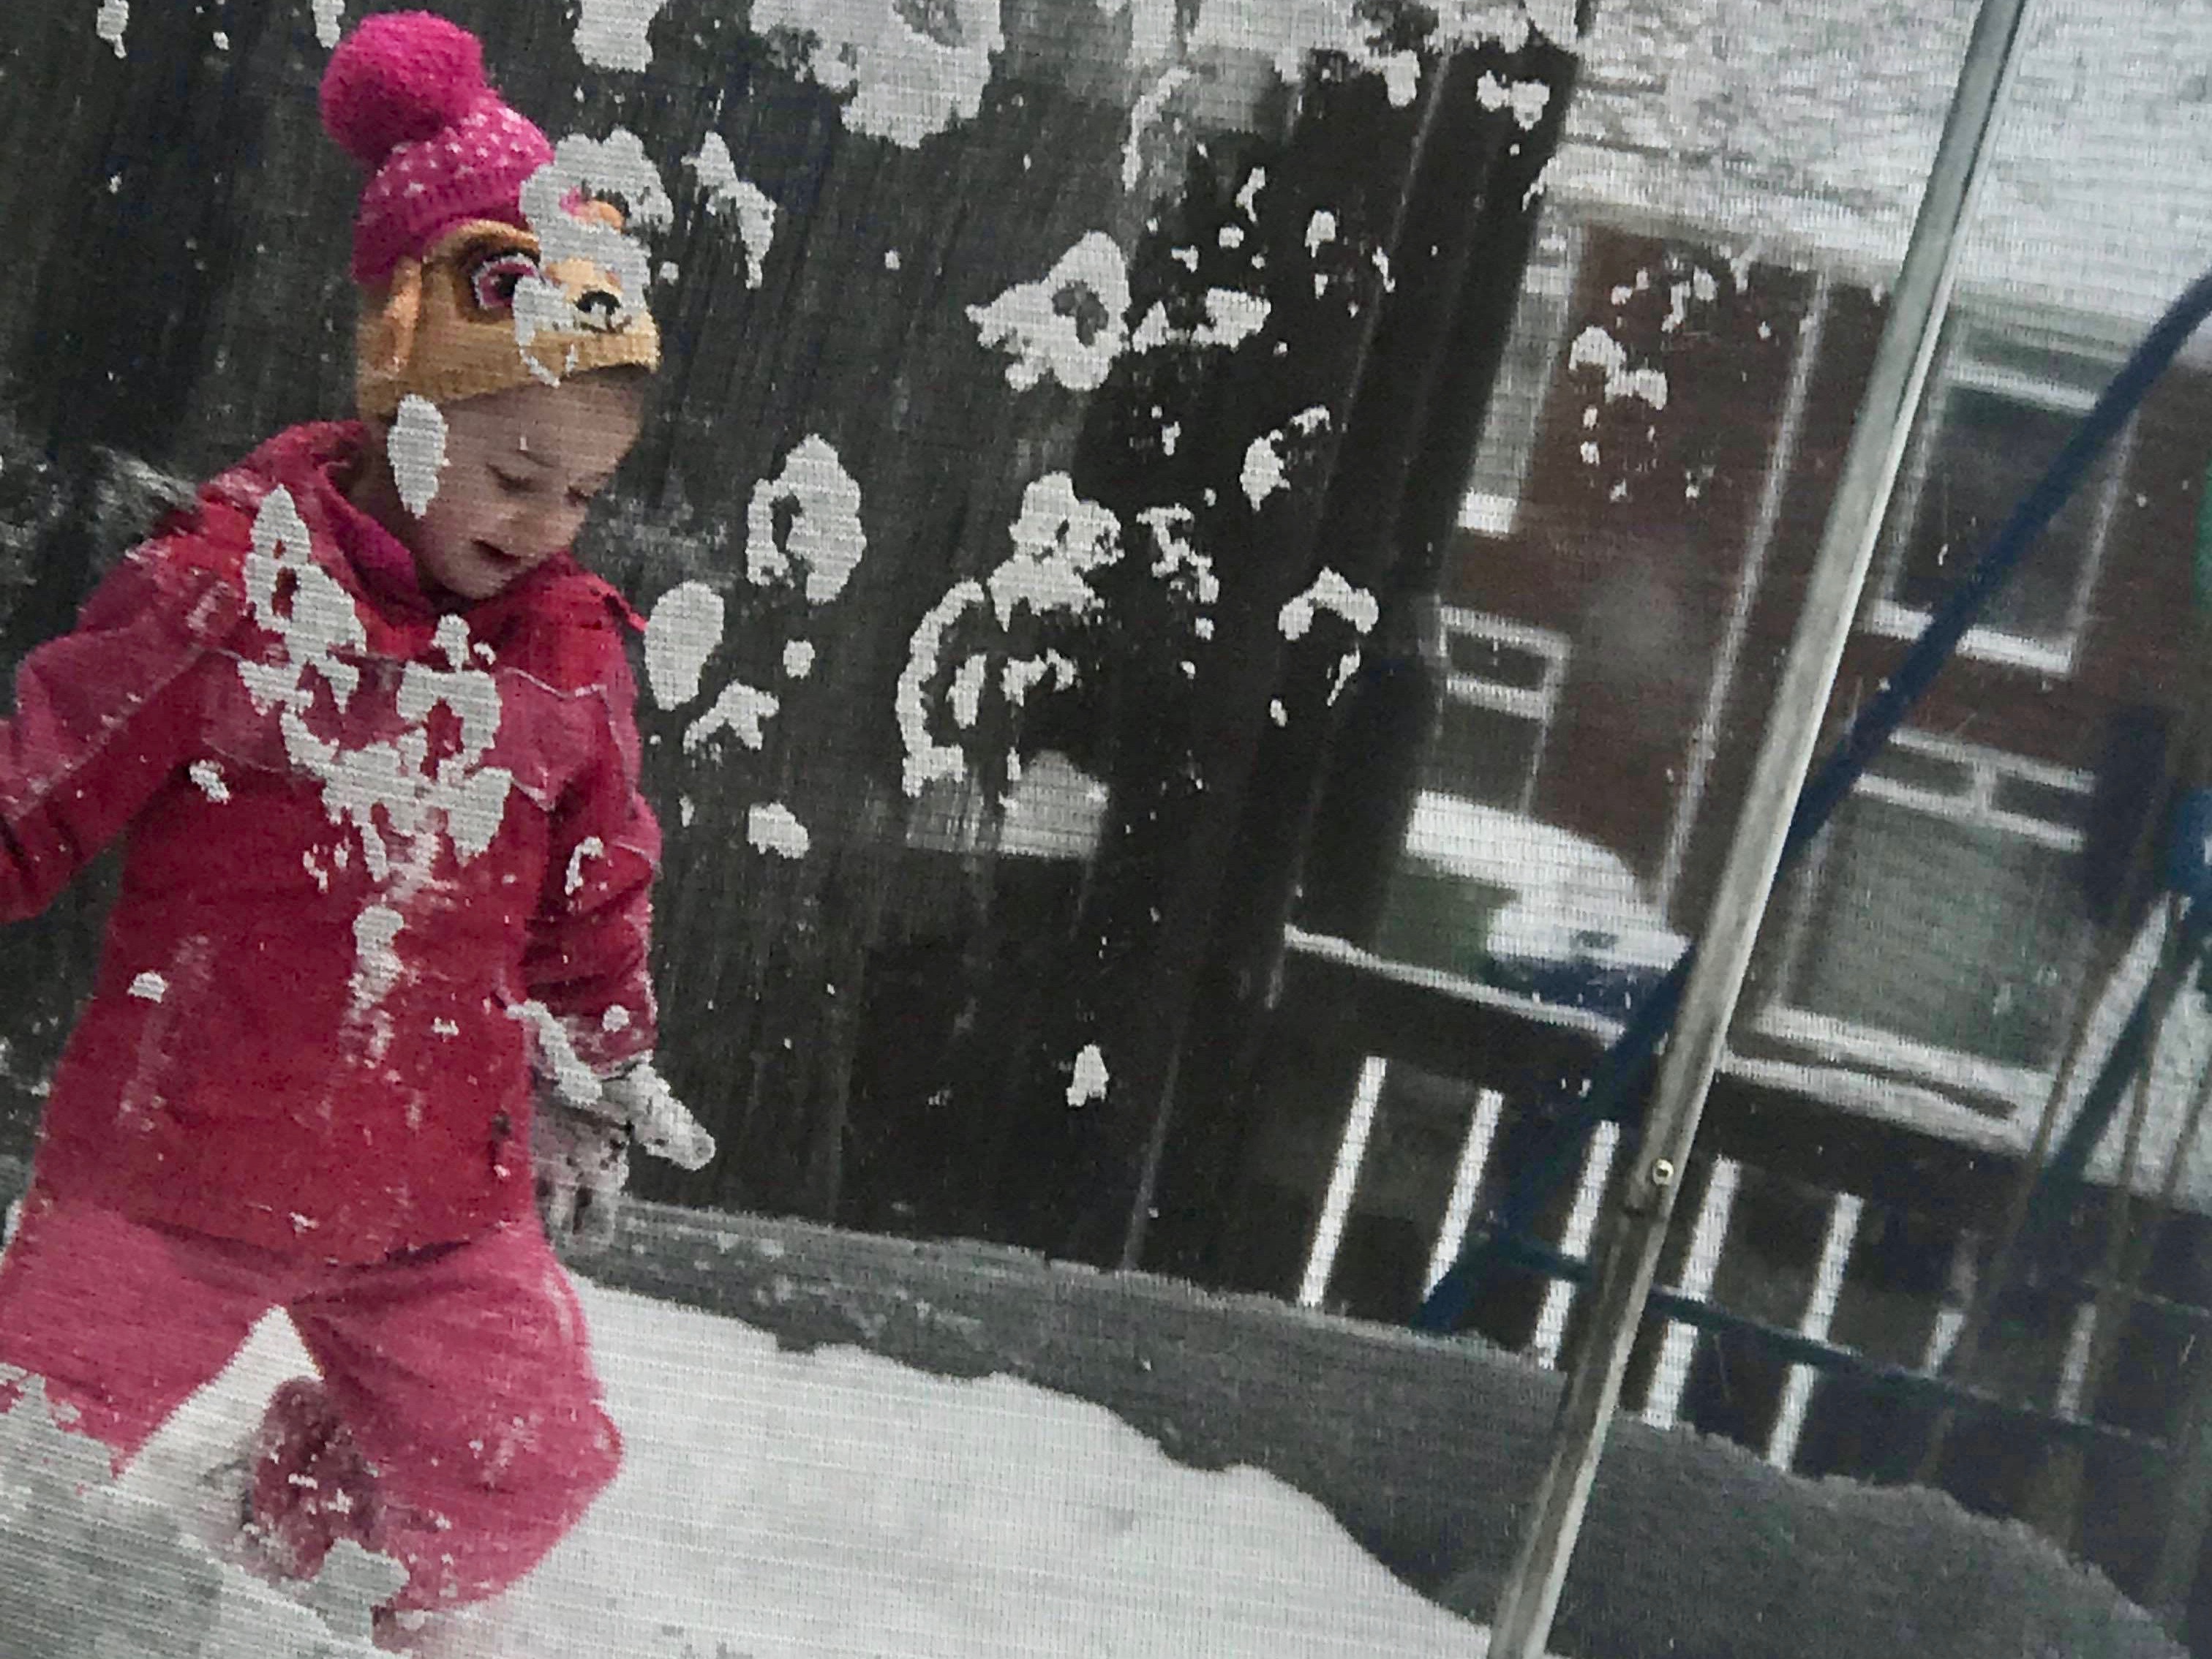 A young girl plays on a trampoline in the snow